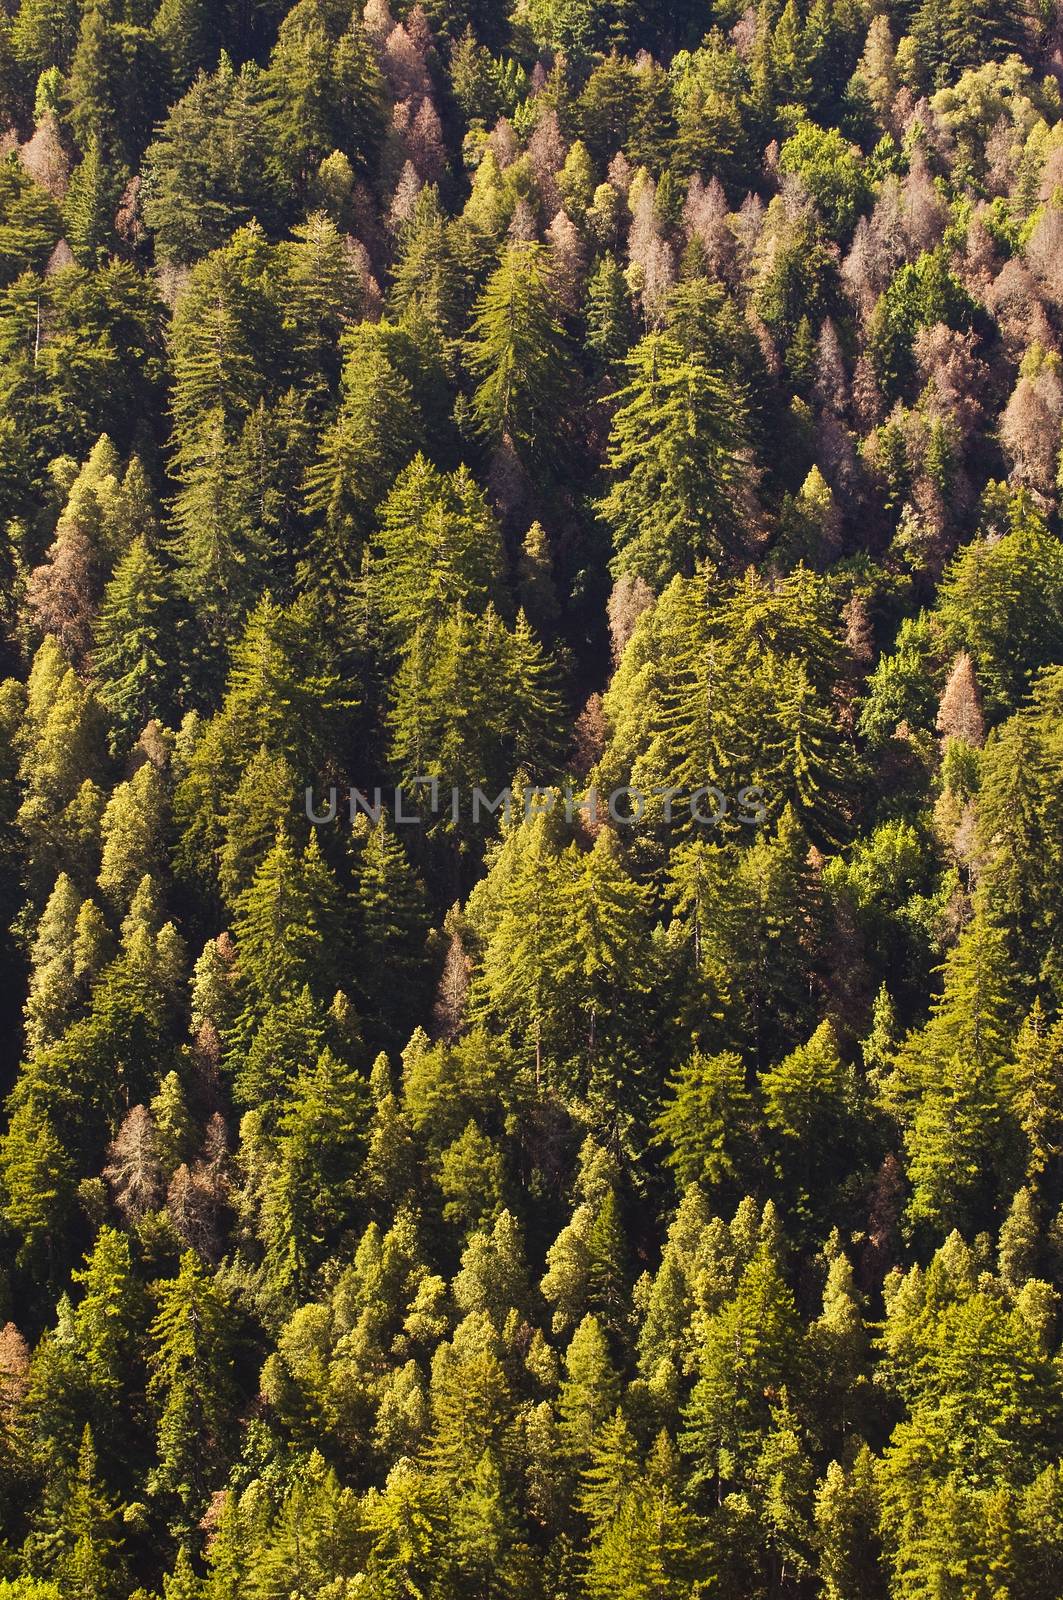 Alive and dead Redwoods intermixed near Big Sur, California by Njean